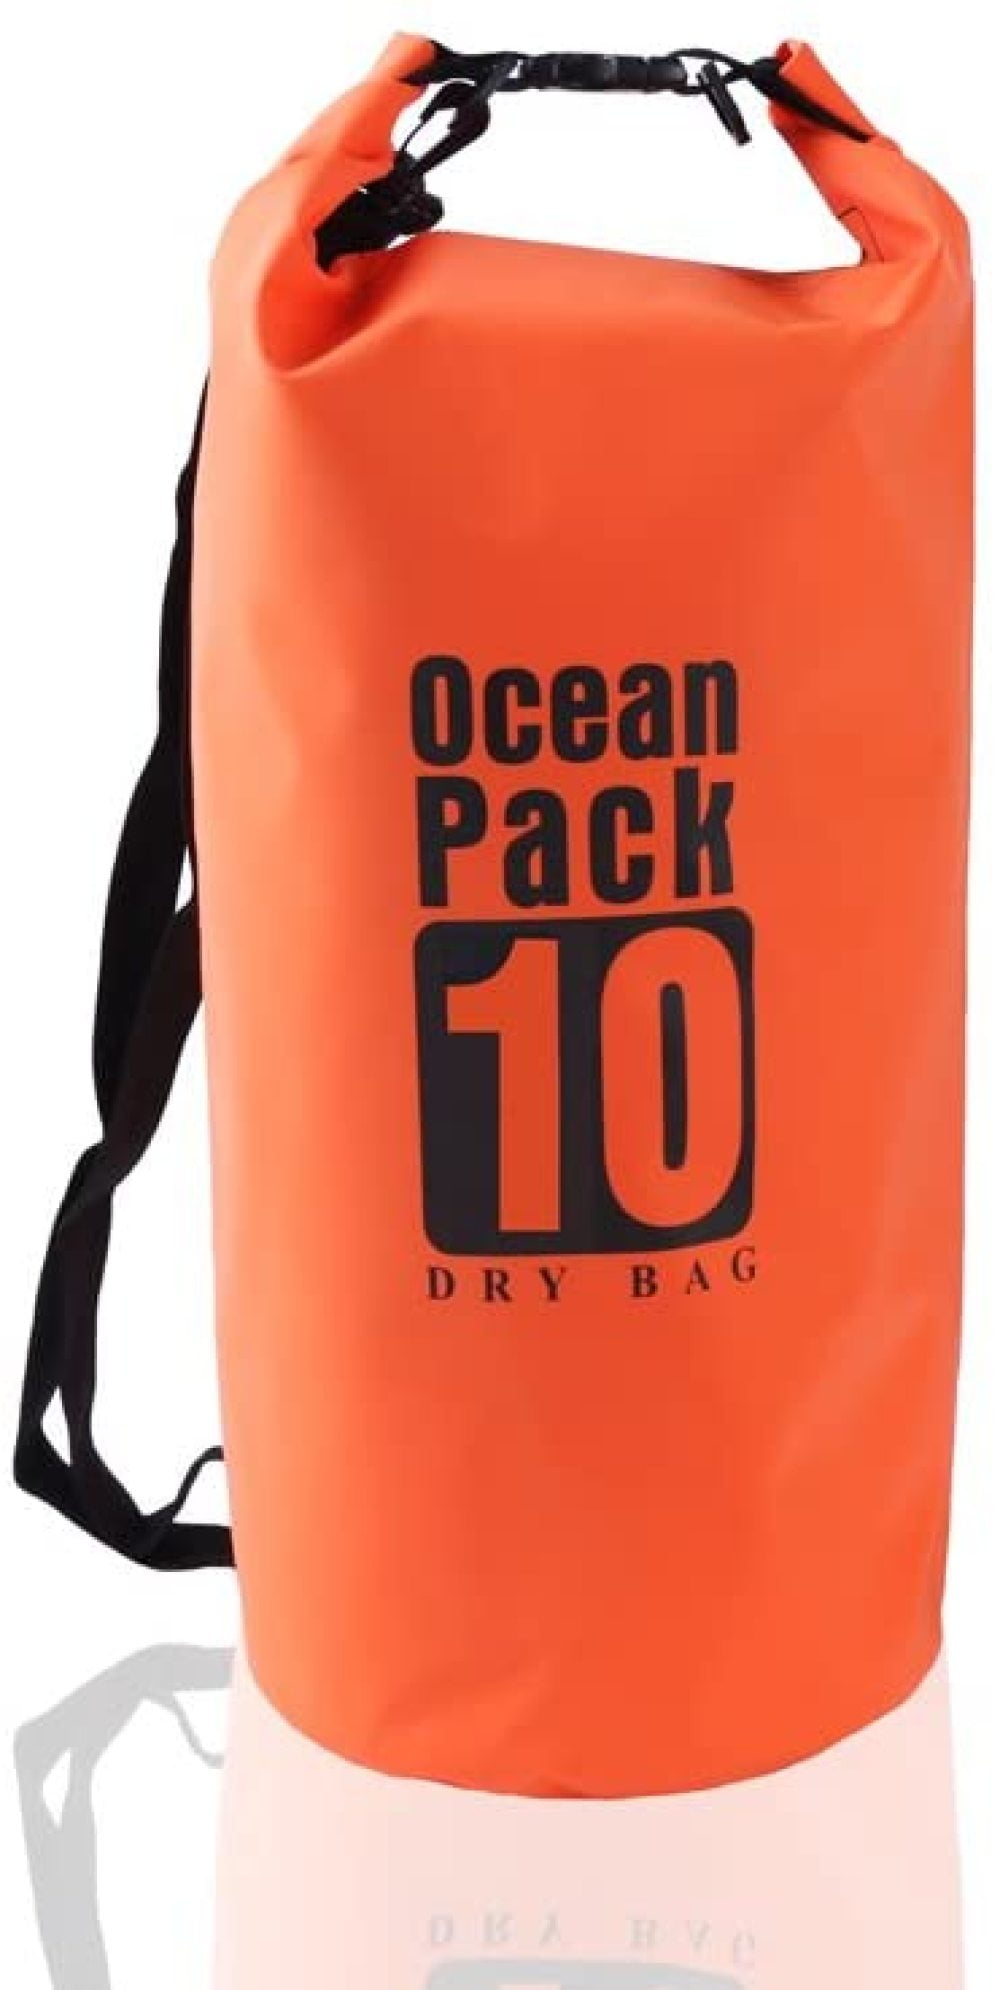 Details about   New Ocean Pack Dry Bag Water Proof Backpack Bag Beach Snow 5L  Small ORANGE 